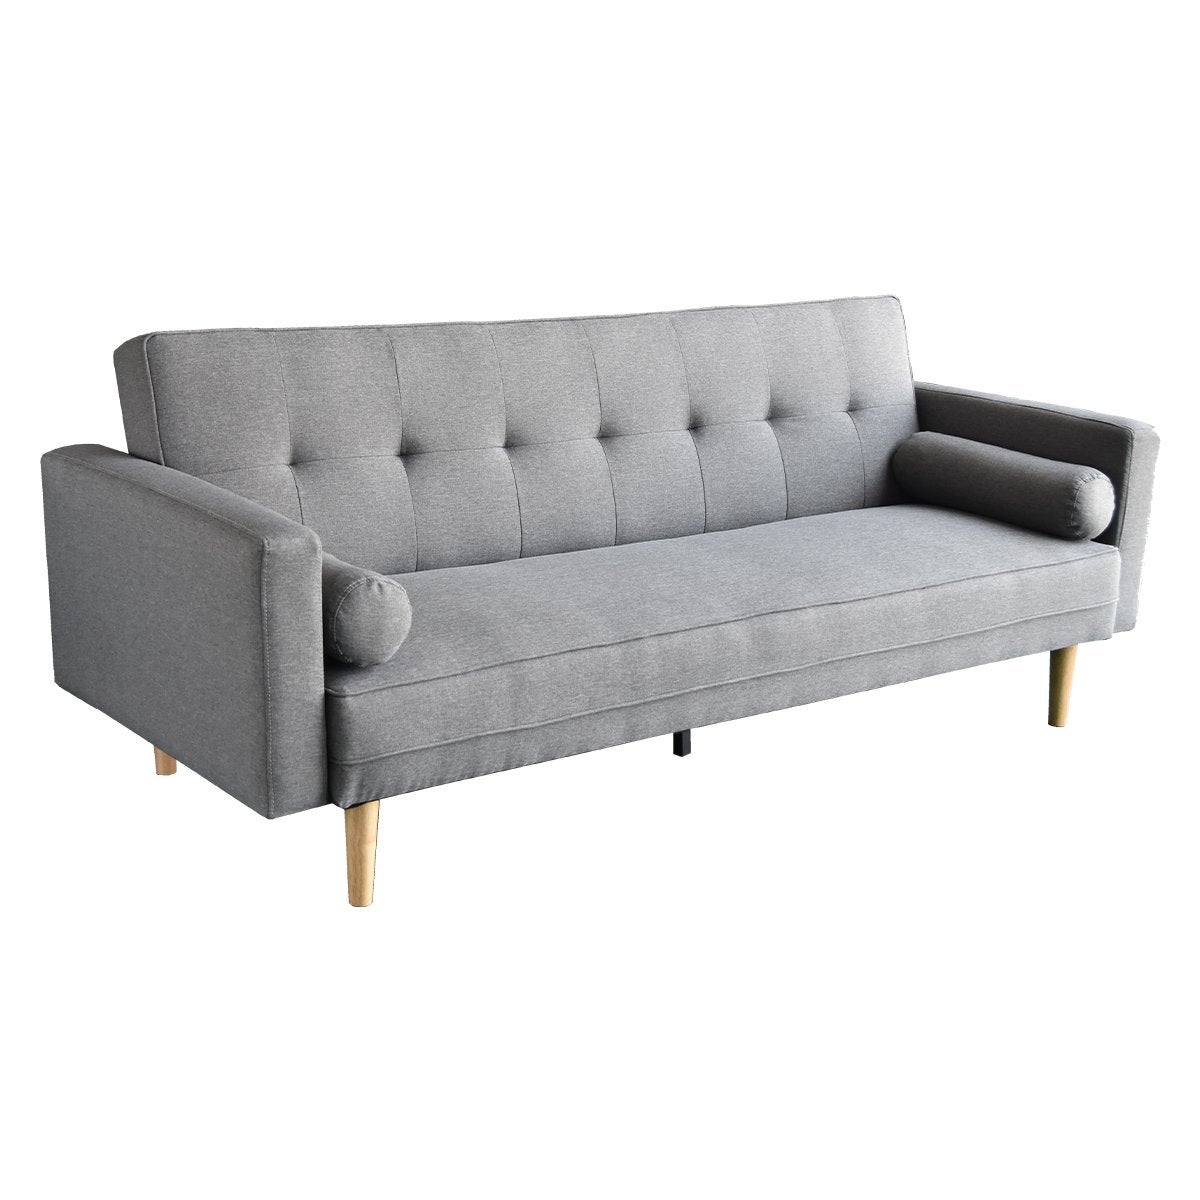 Madison Sofa Bed Lounge Couch Futon Furniture Home Light Grey Linen Suite